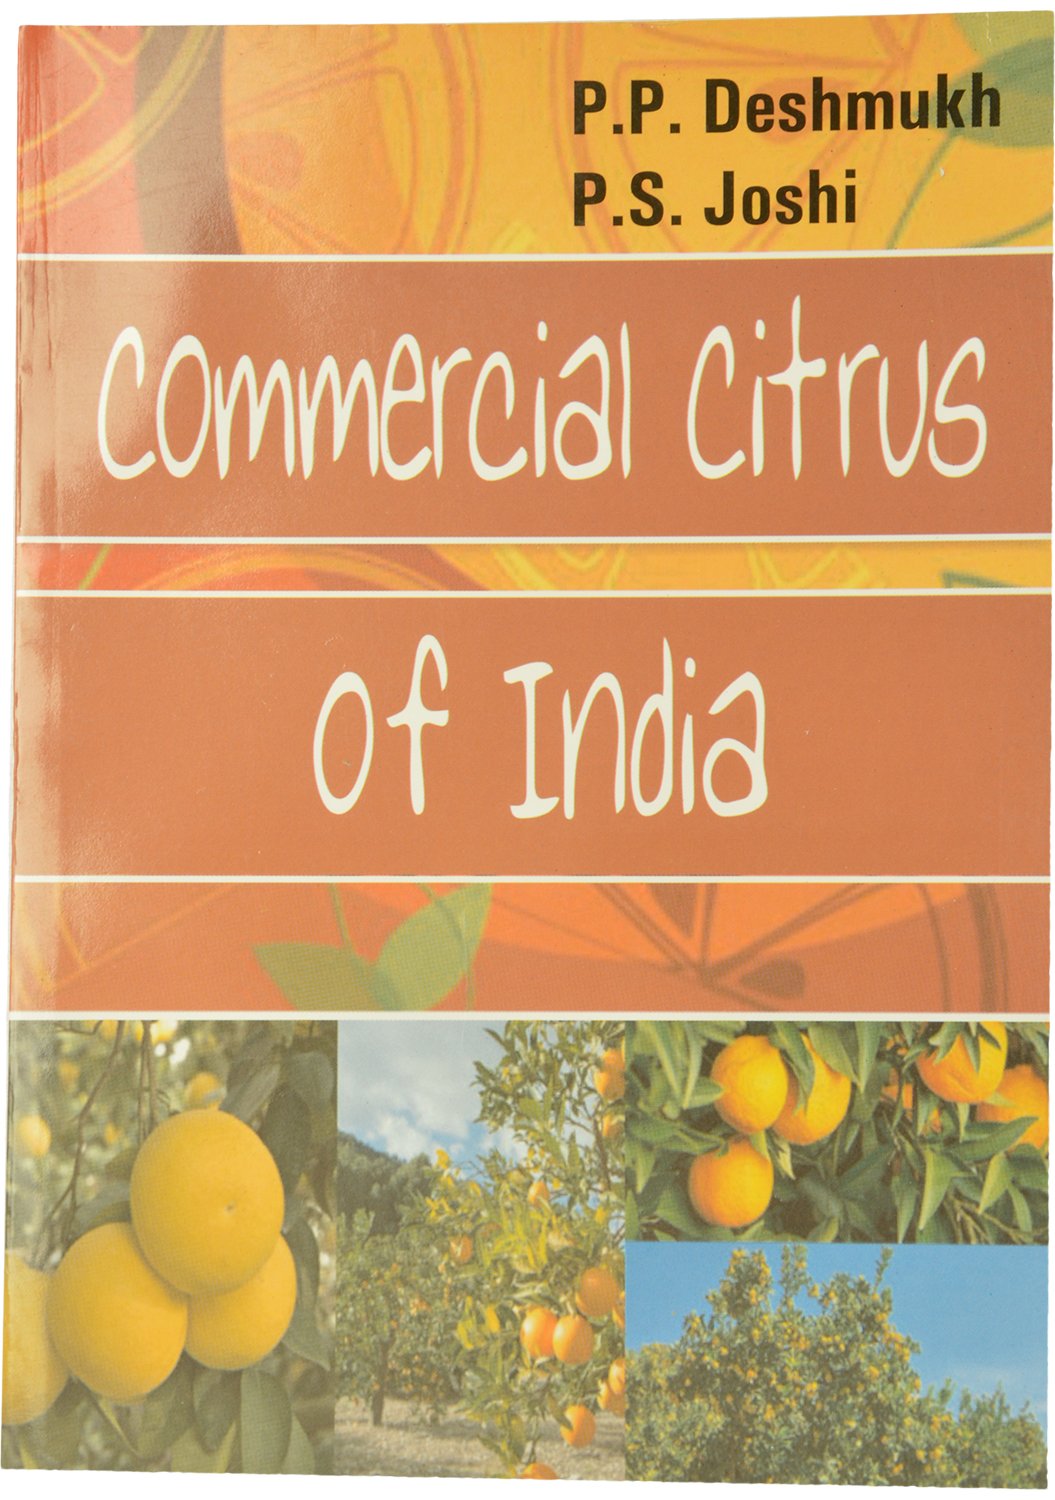 Commercial Citrus of India